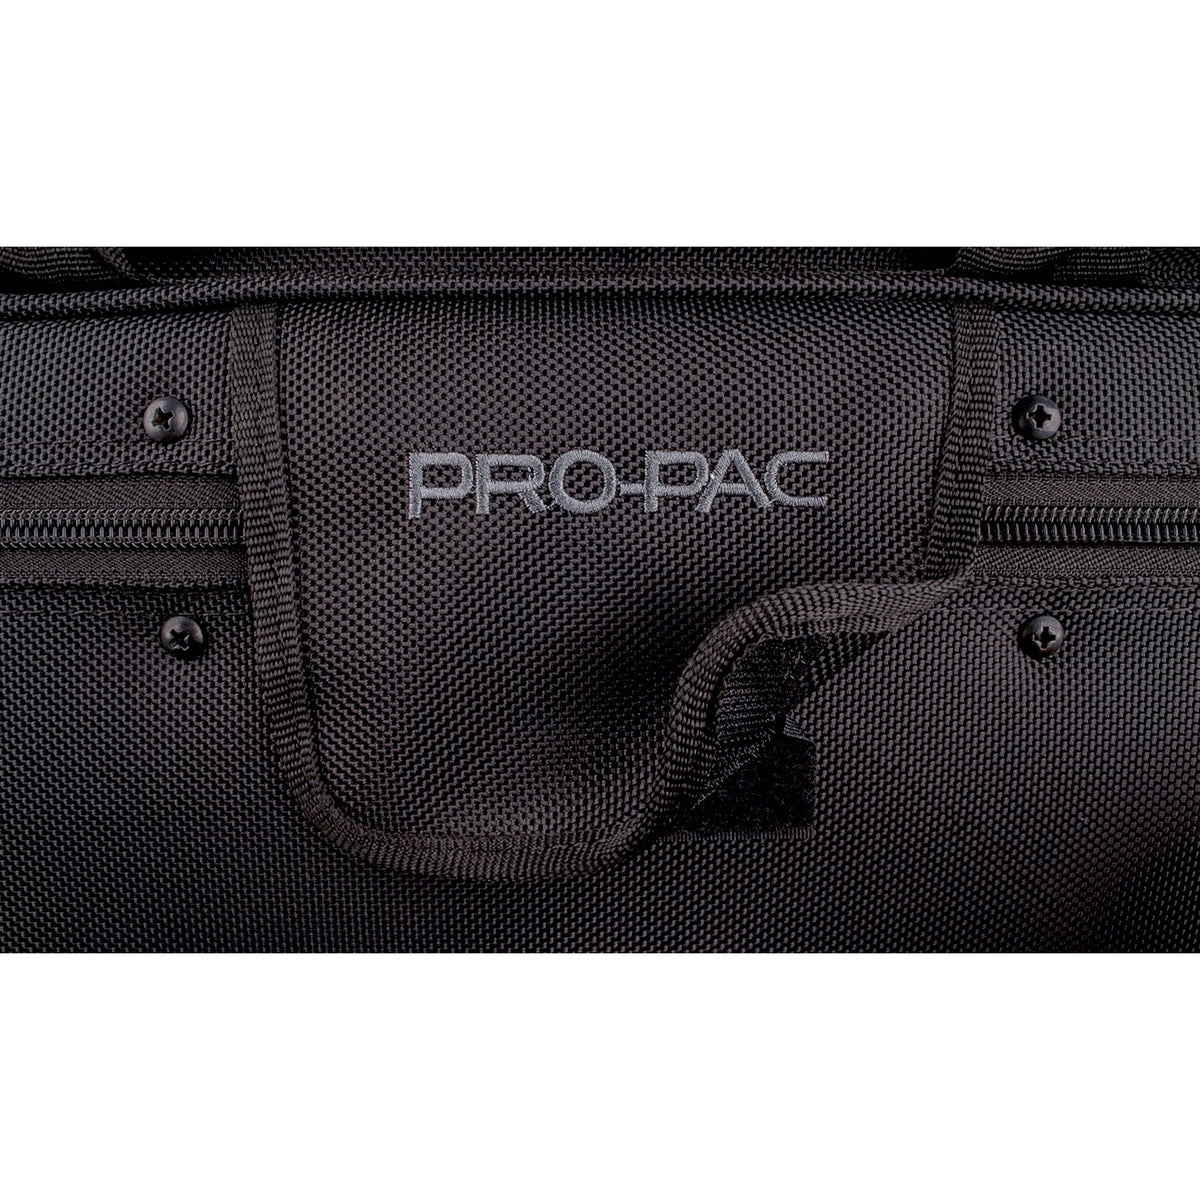 Protec - French Horn Screw Bell IPAC Case (Deluxe)-Case-Protec-Music Elements